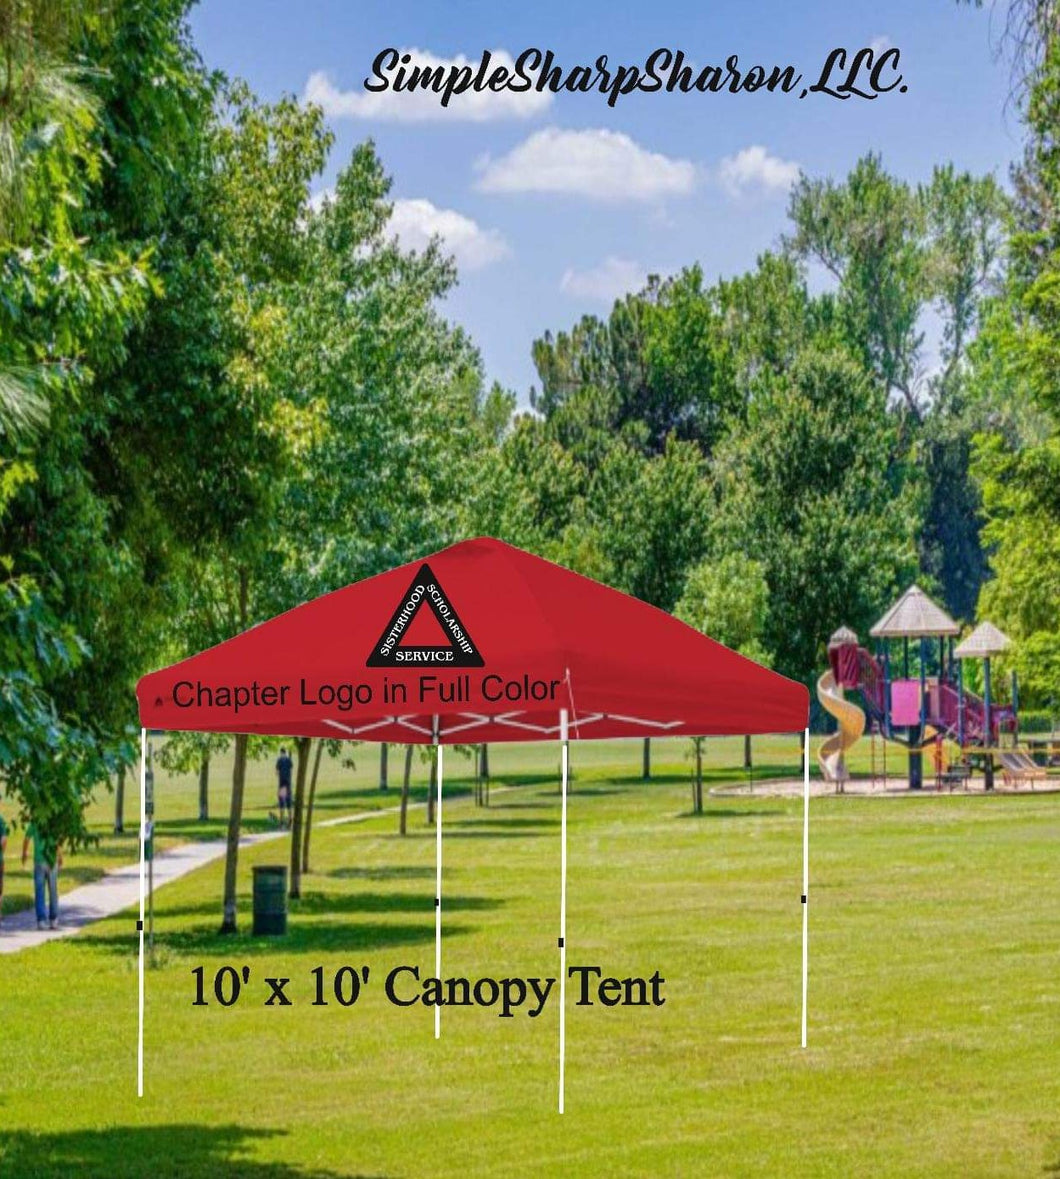 DST Canopy Tent with Personal, Business or Chapter Logo Design